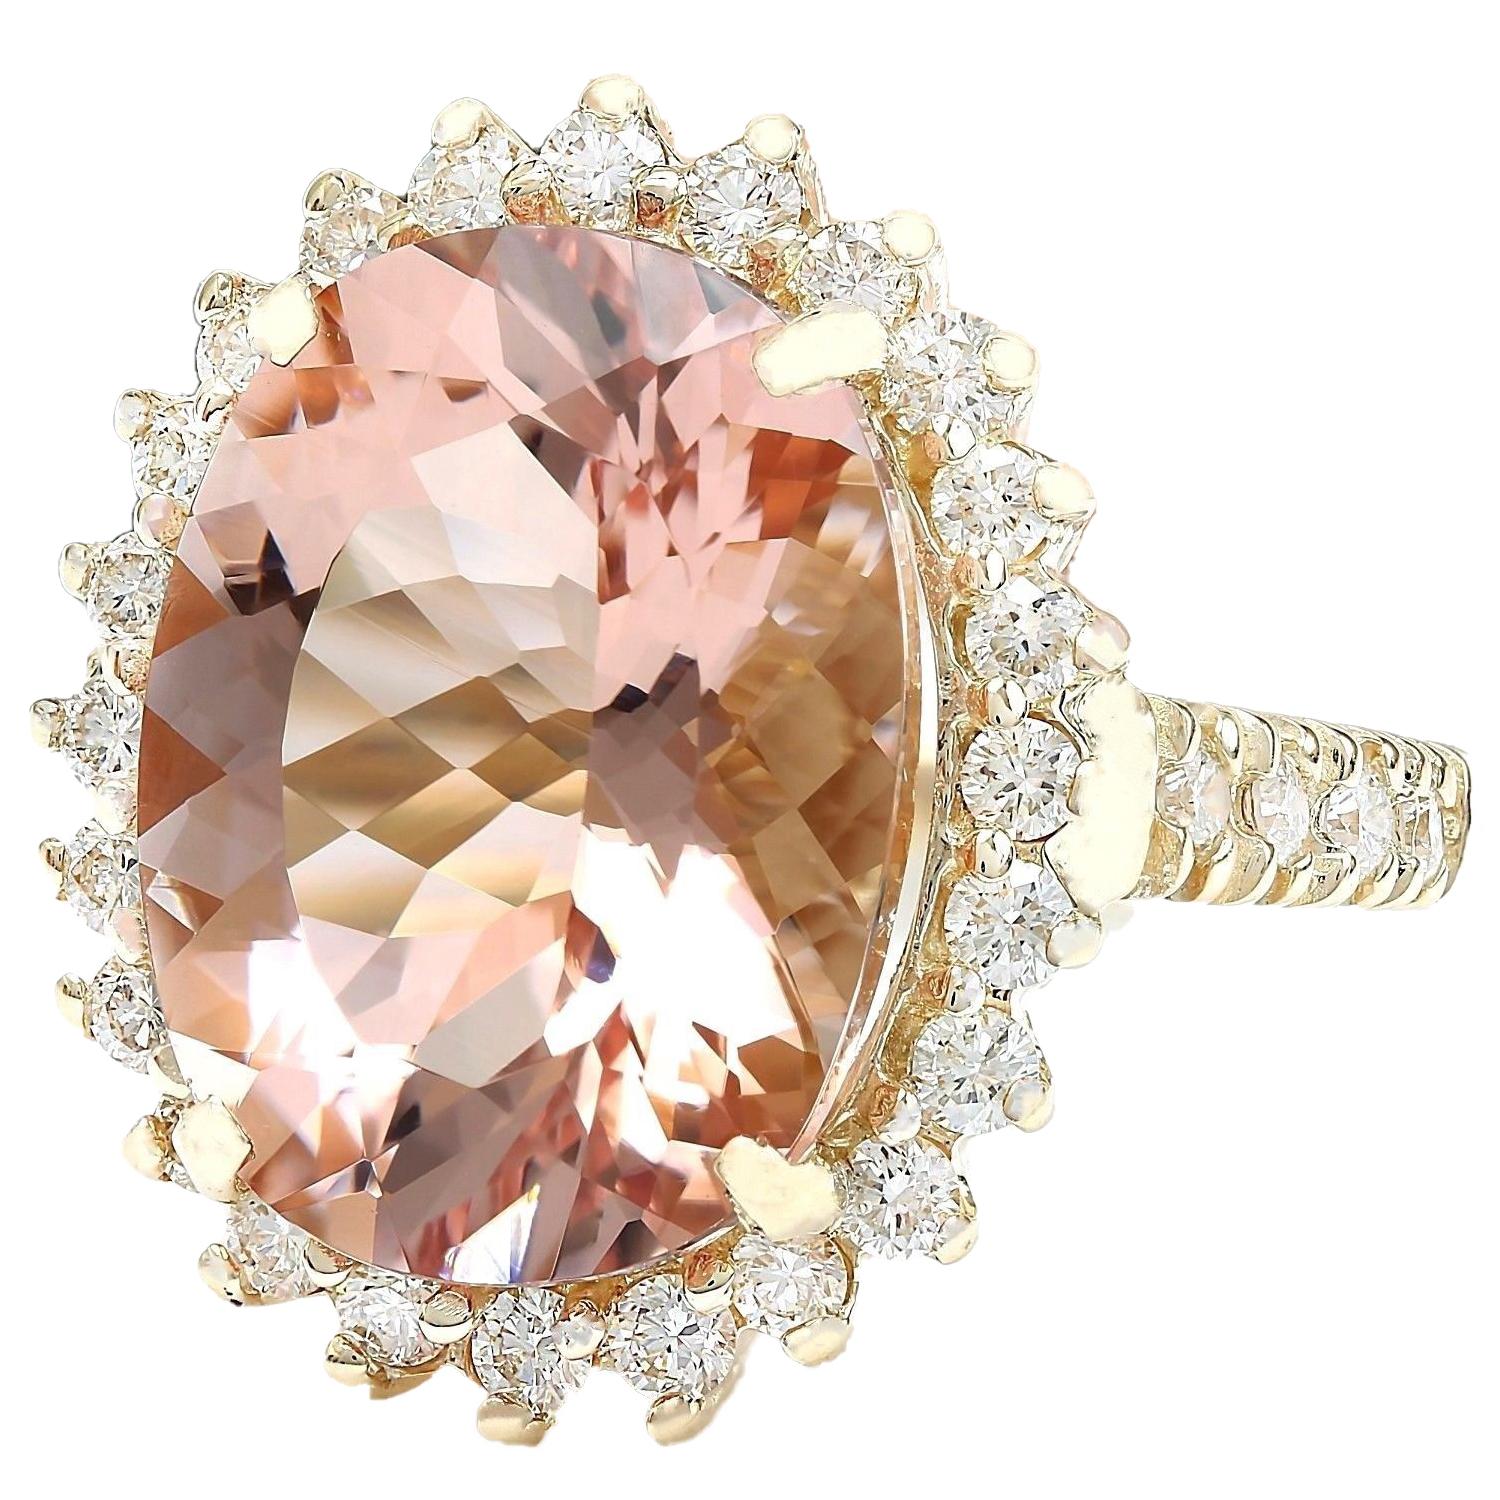 9.35 Carat Natural Morganite 14K Solid Yellow Gold Diamond Ring
 Item Type: Ring
 Item Style: Cocktail
 Material: 14K Yellow Gold
 Mainstone: Morganite
 Stone Color: Peach
 Stone Weight: 8.35 Carat
 Stone Shape: Oval
 Stone Quantity: 1
 Stone